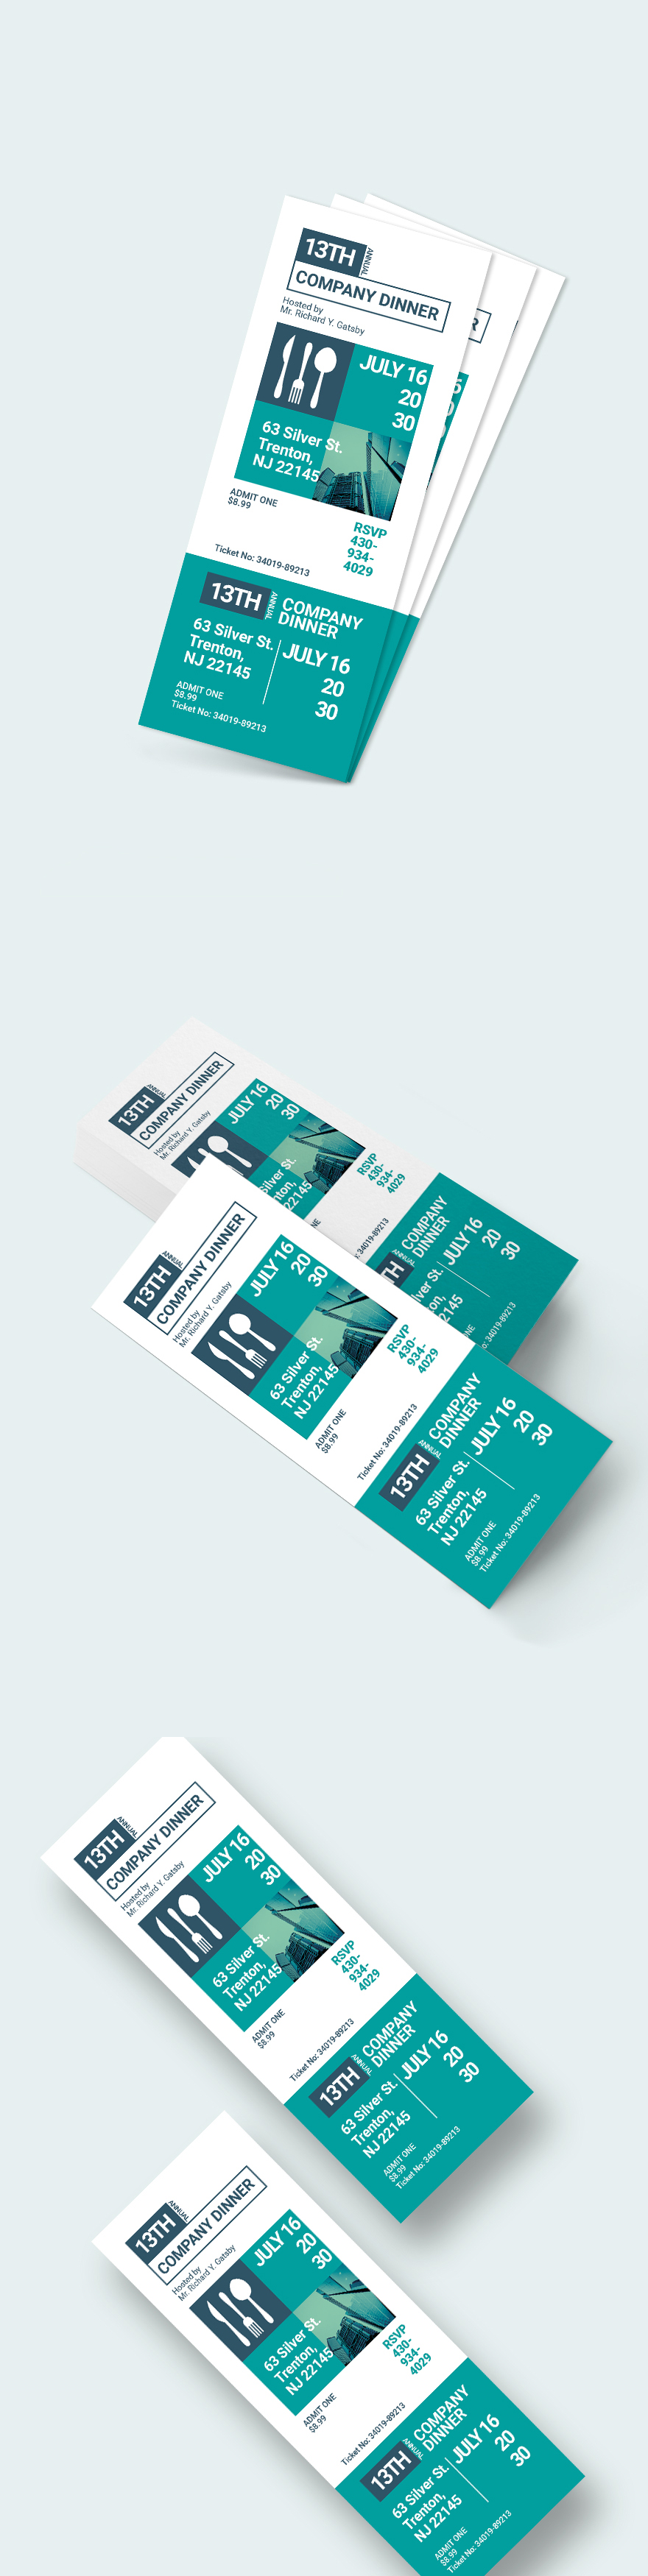 Free Gala Dinner Ticket Template Illustrator Word Apple Pages PSD 